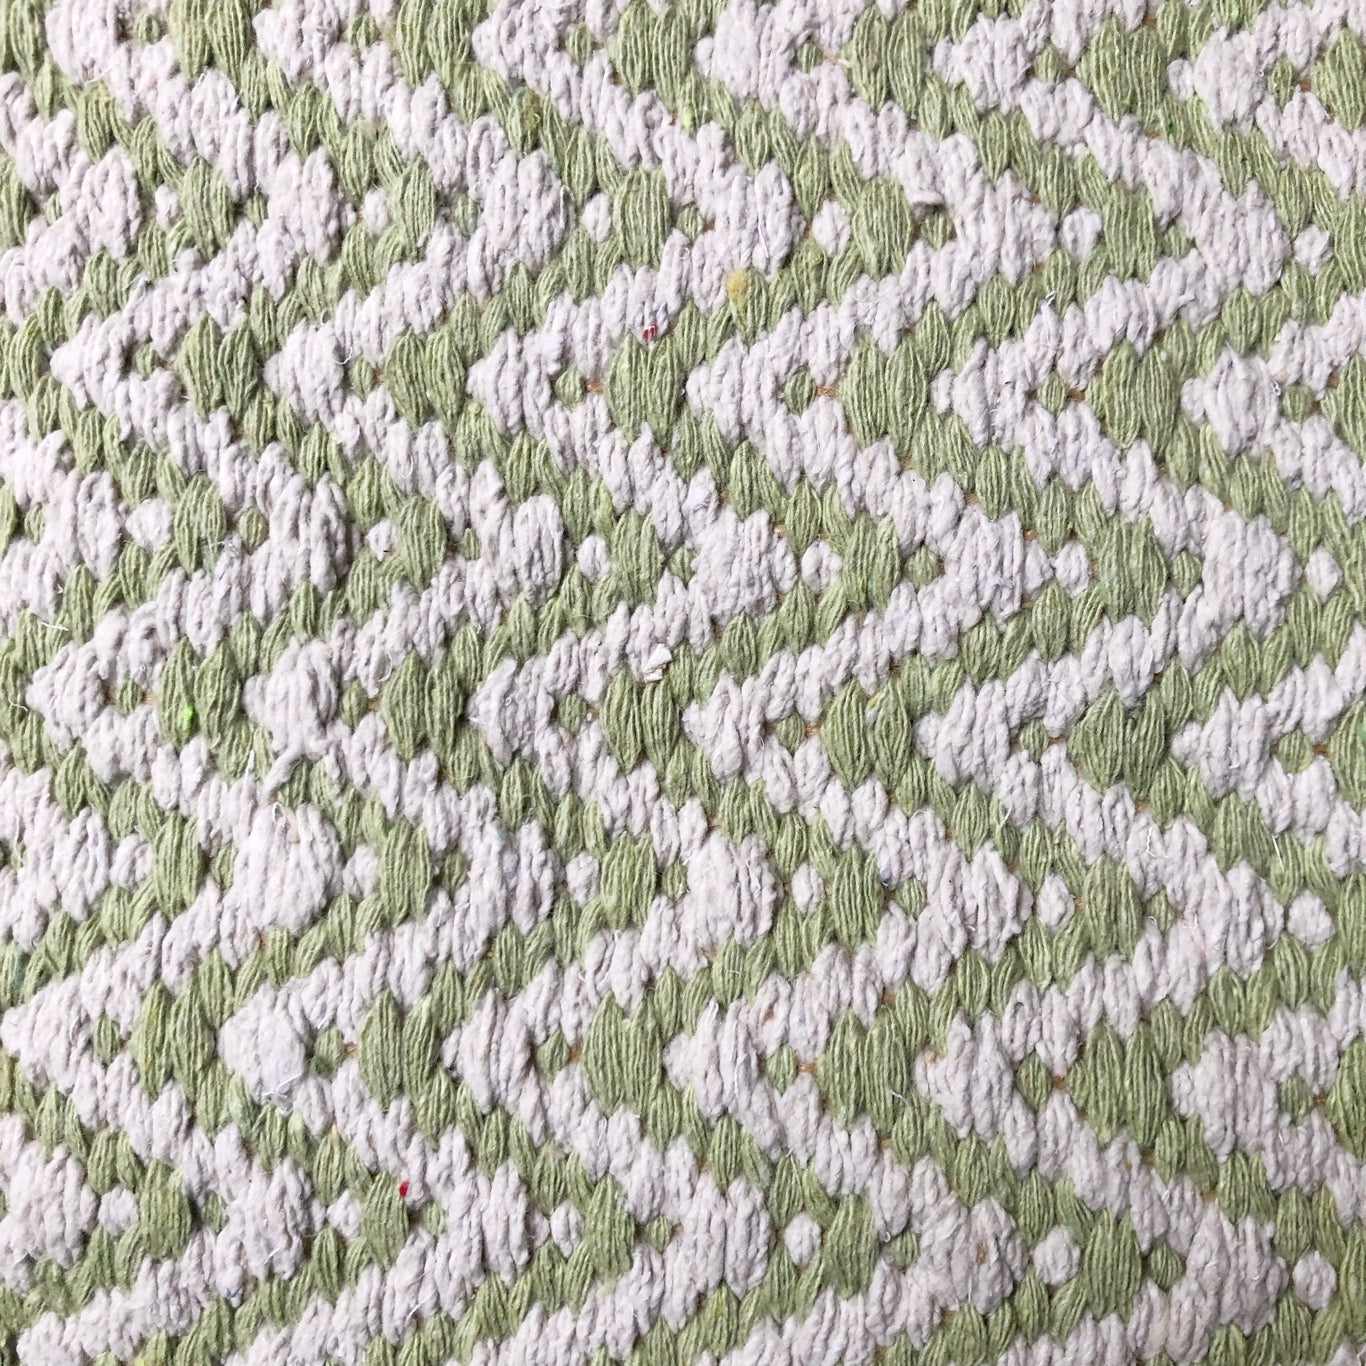 Zigzag Re-cycled Cotton Rug - Pistachio